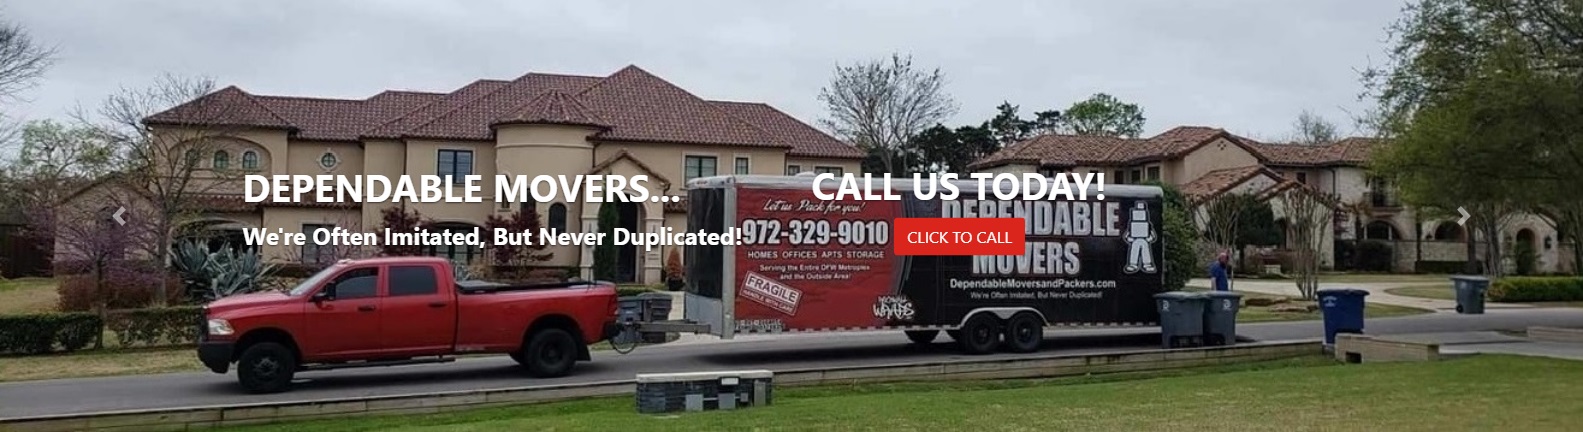 Dependable Movers in the Mesquite Texas area - Home Office Apartment Movers Residential Commercial Movers in the Mesquite Texas area